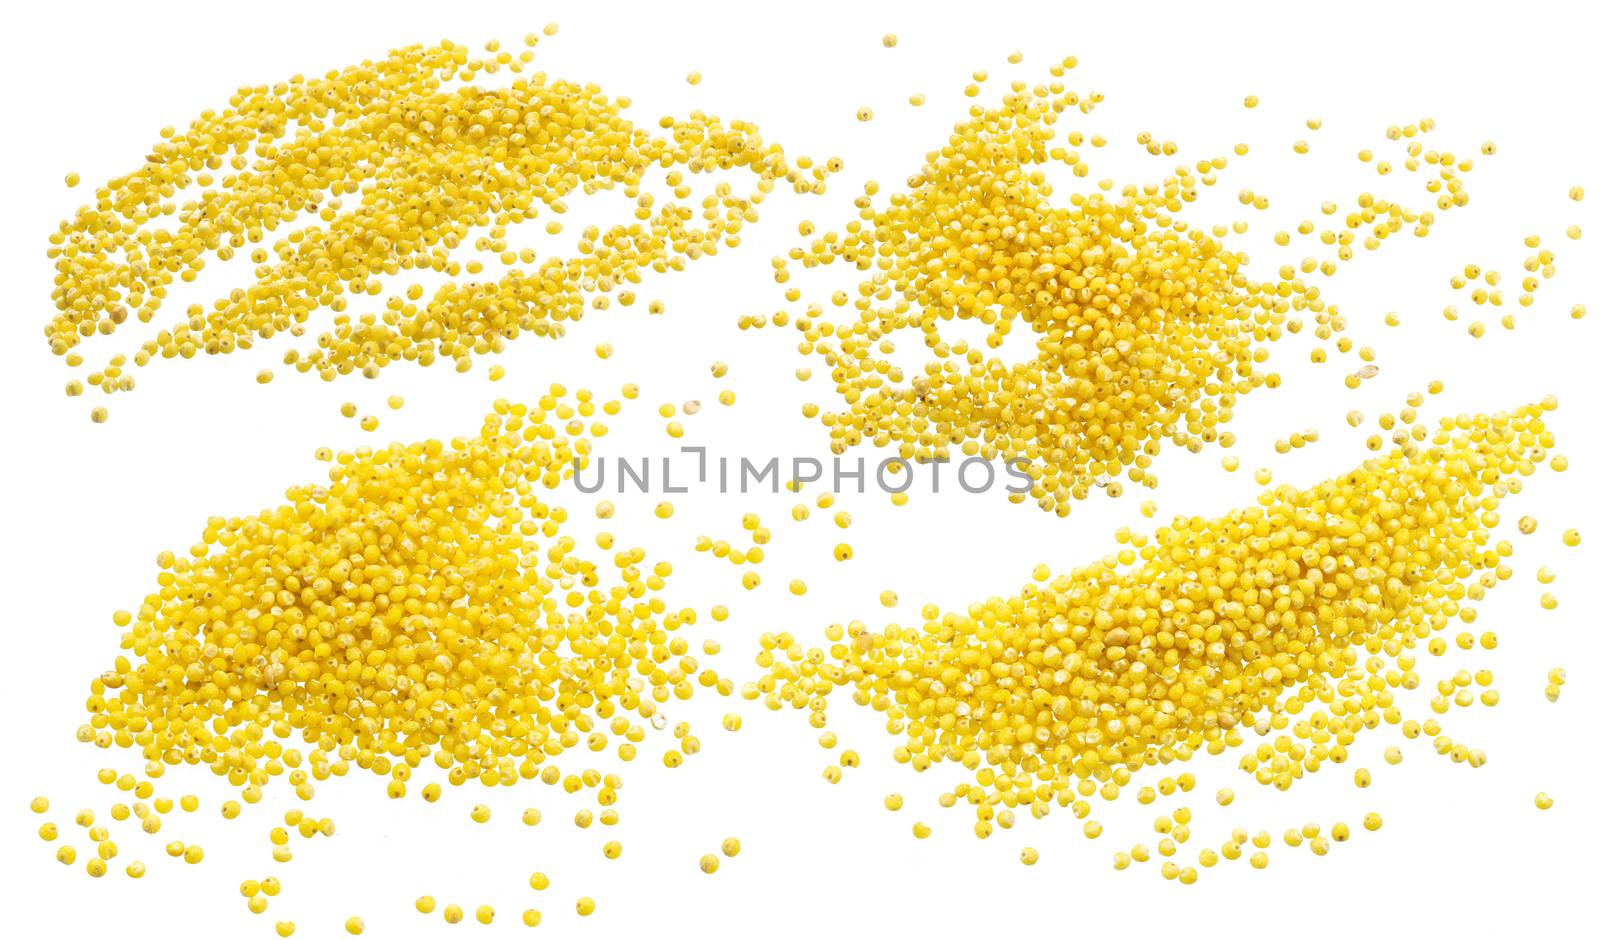 Millet seeds isolated on white background. Collection